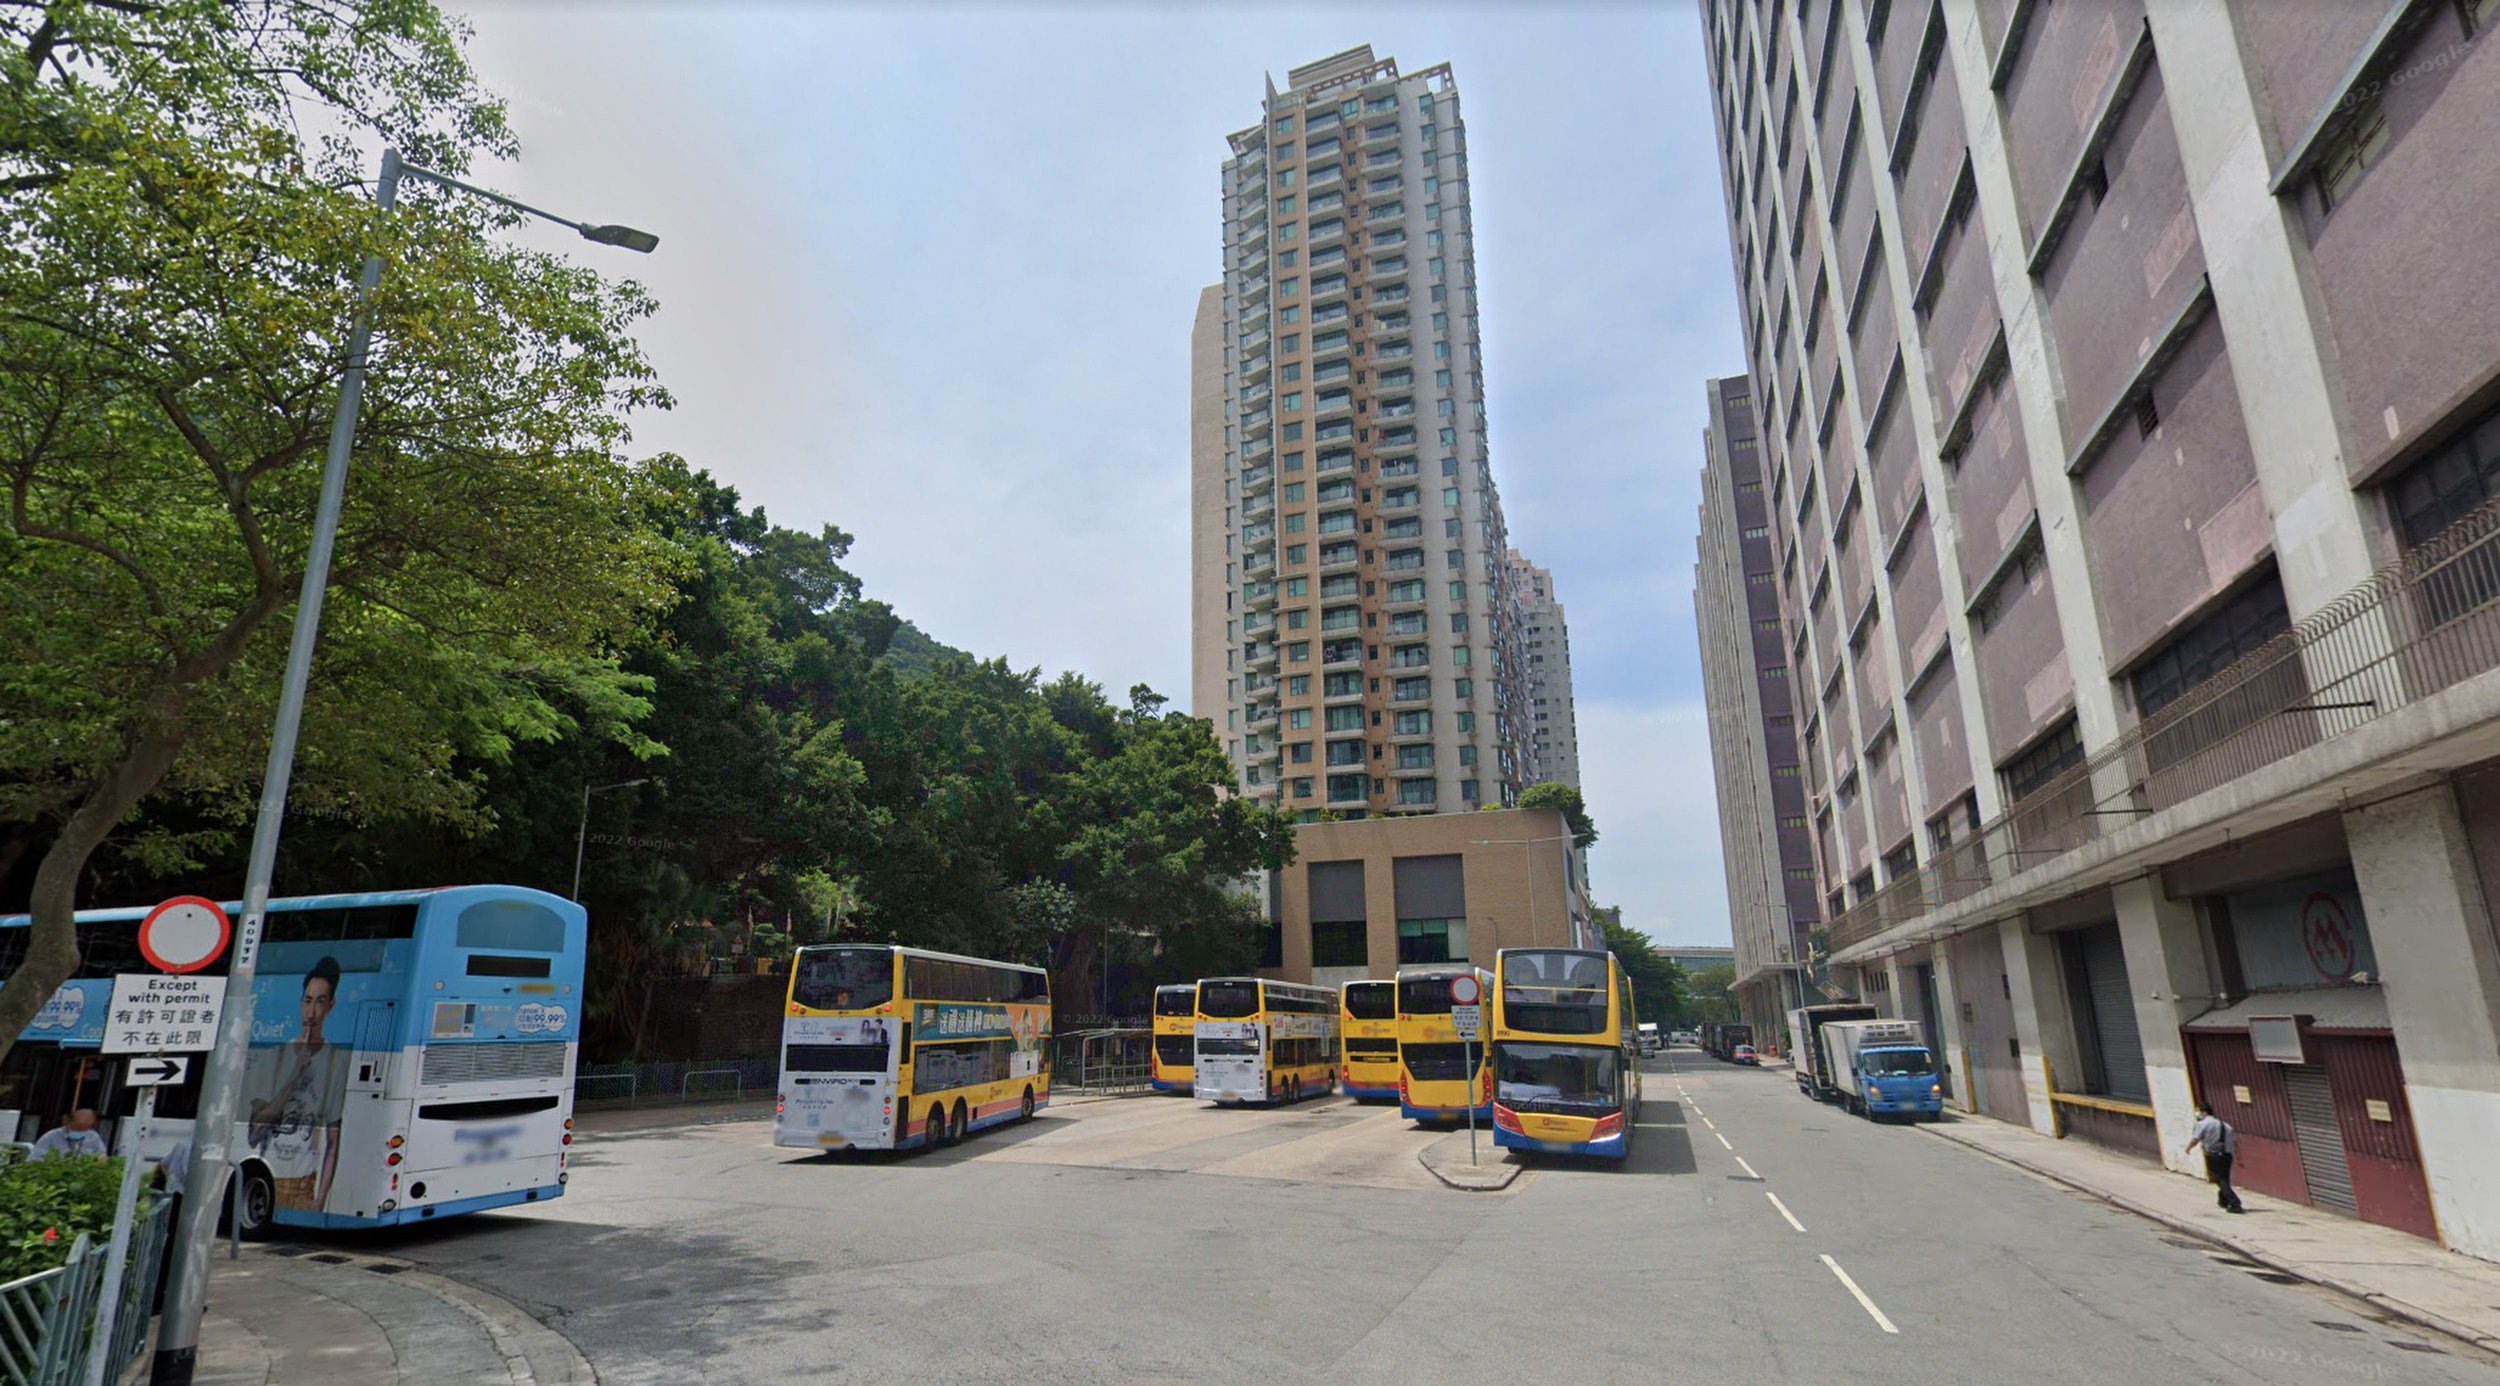 The junction of Sai Ning Street and Victoria Road in Kennedy Town. Photo: Handout